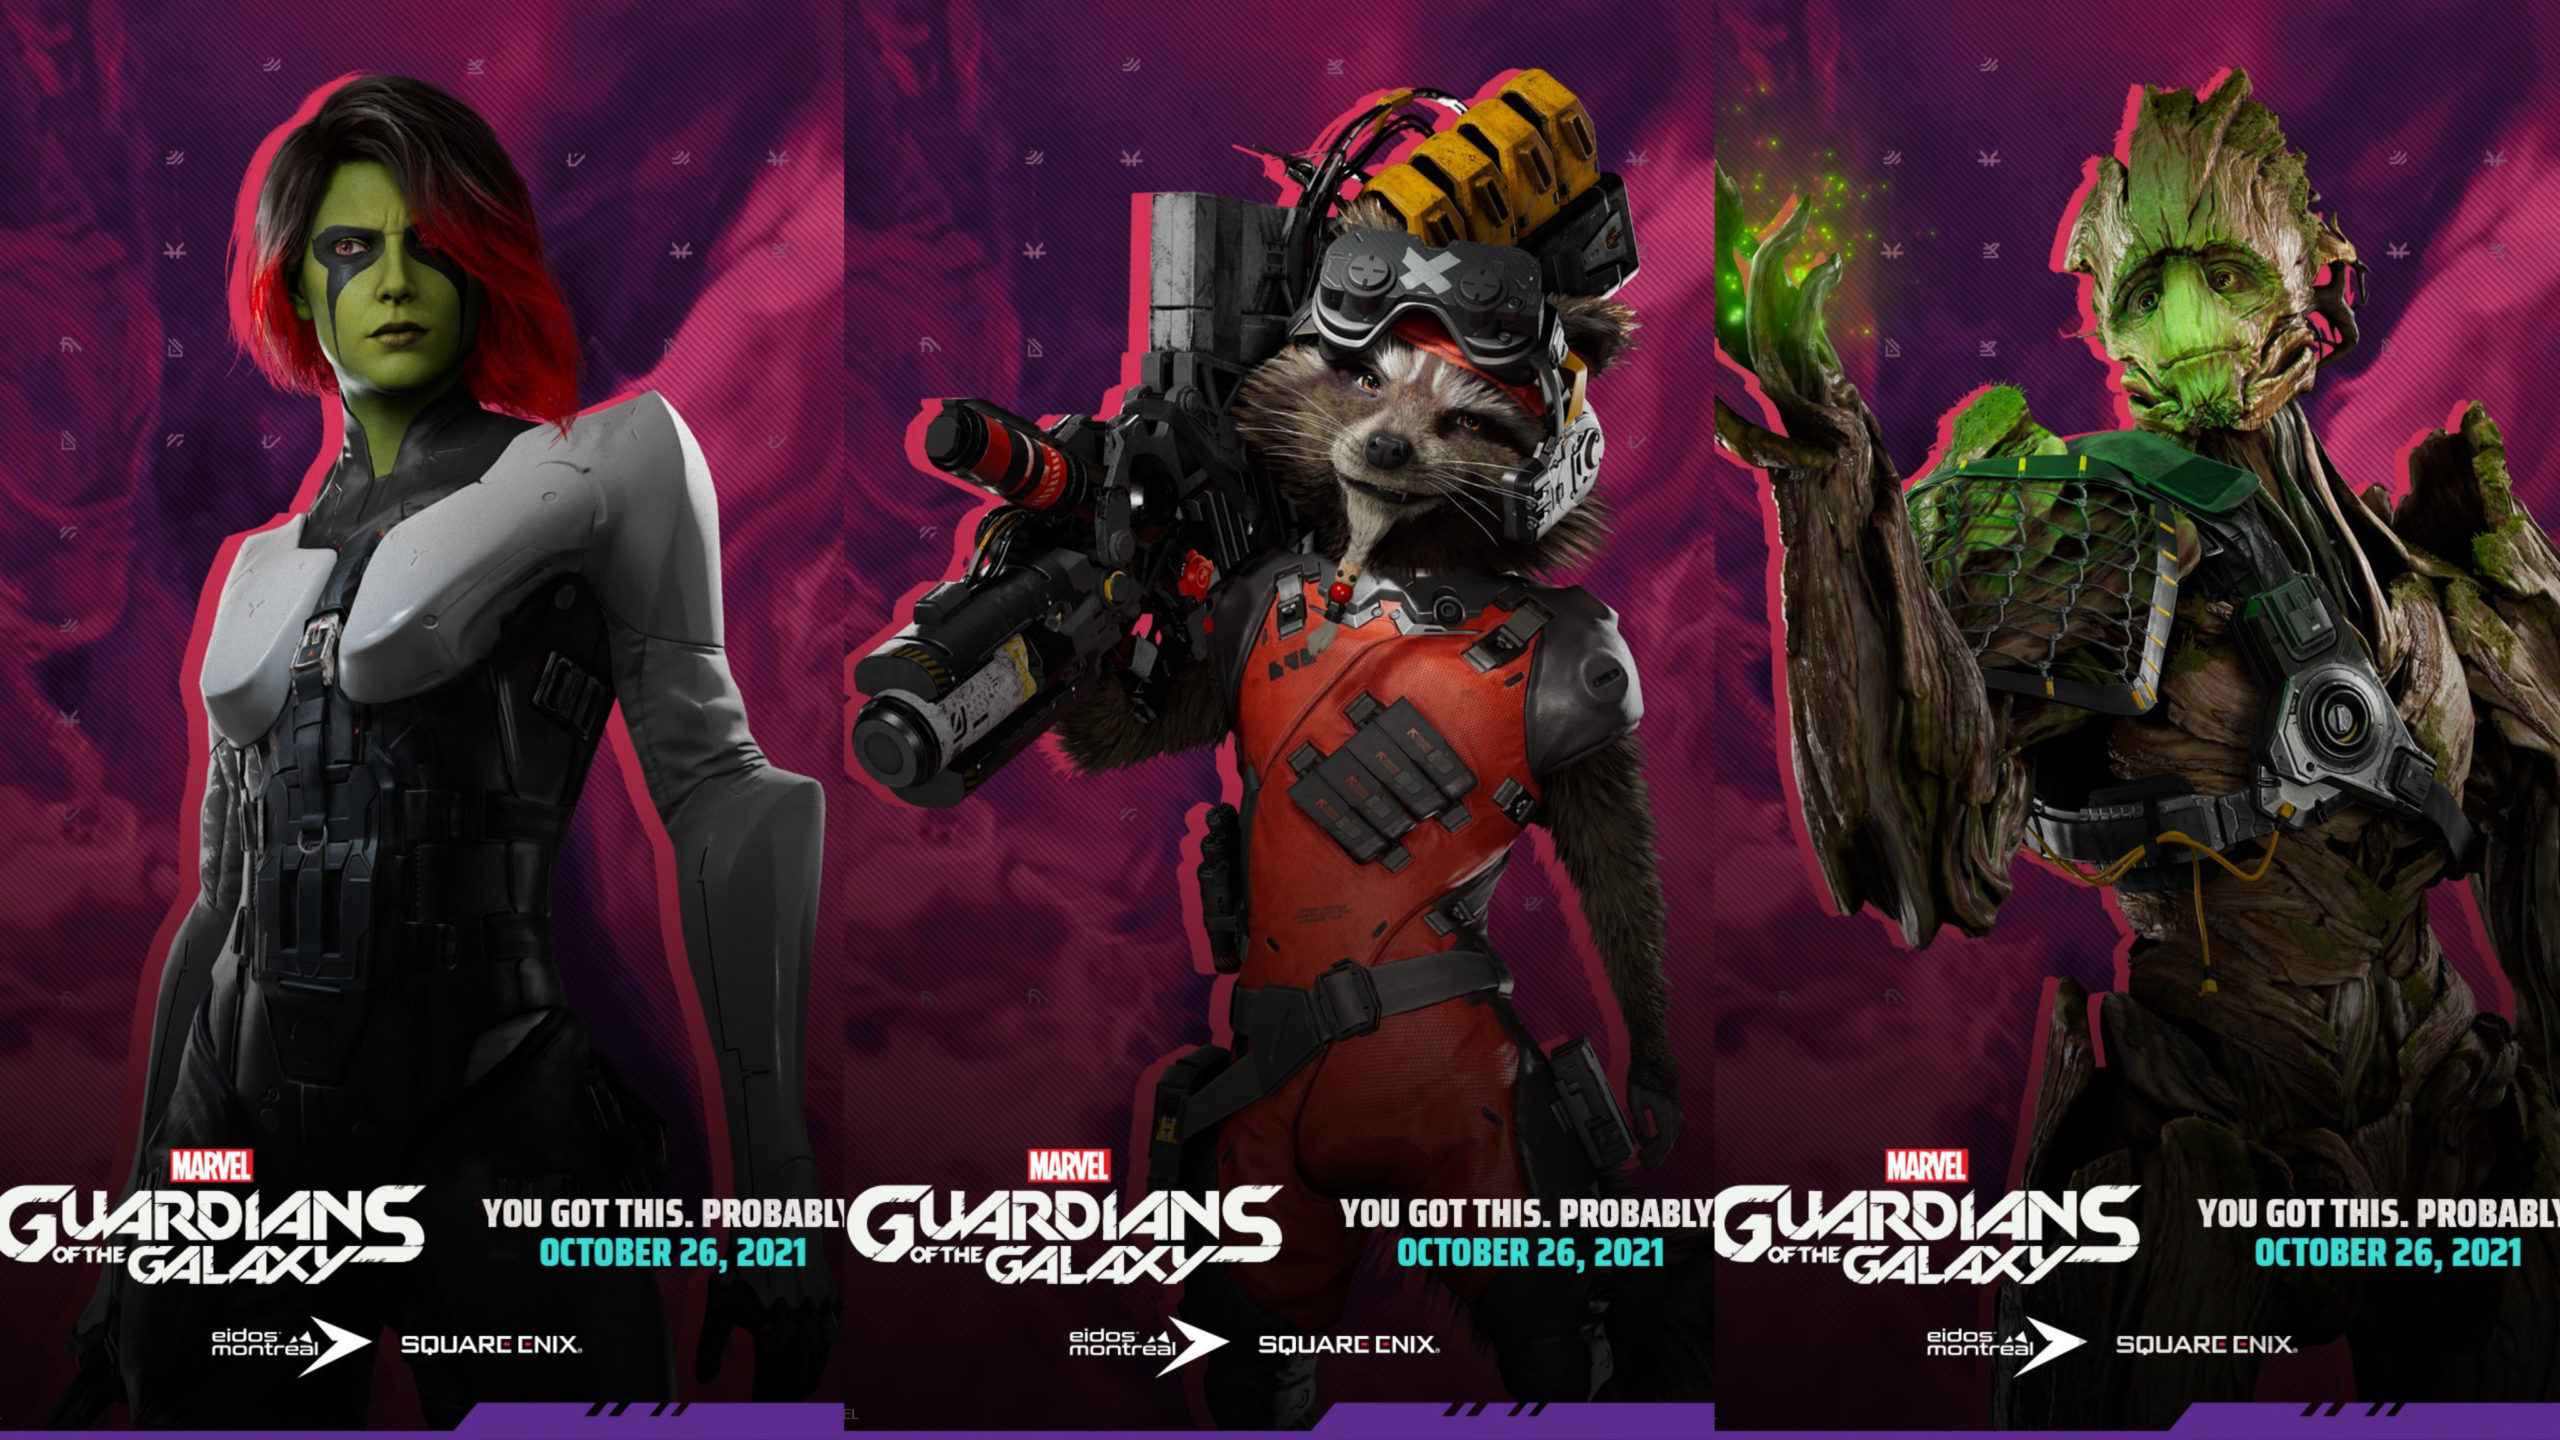 Marvel's Guardians of the Galaxy Posters Revealed MarvelBlog.com